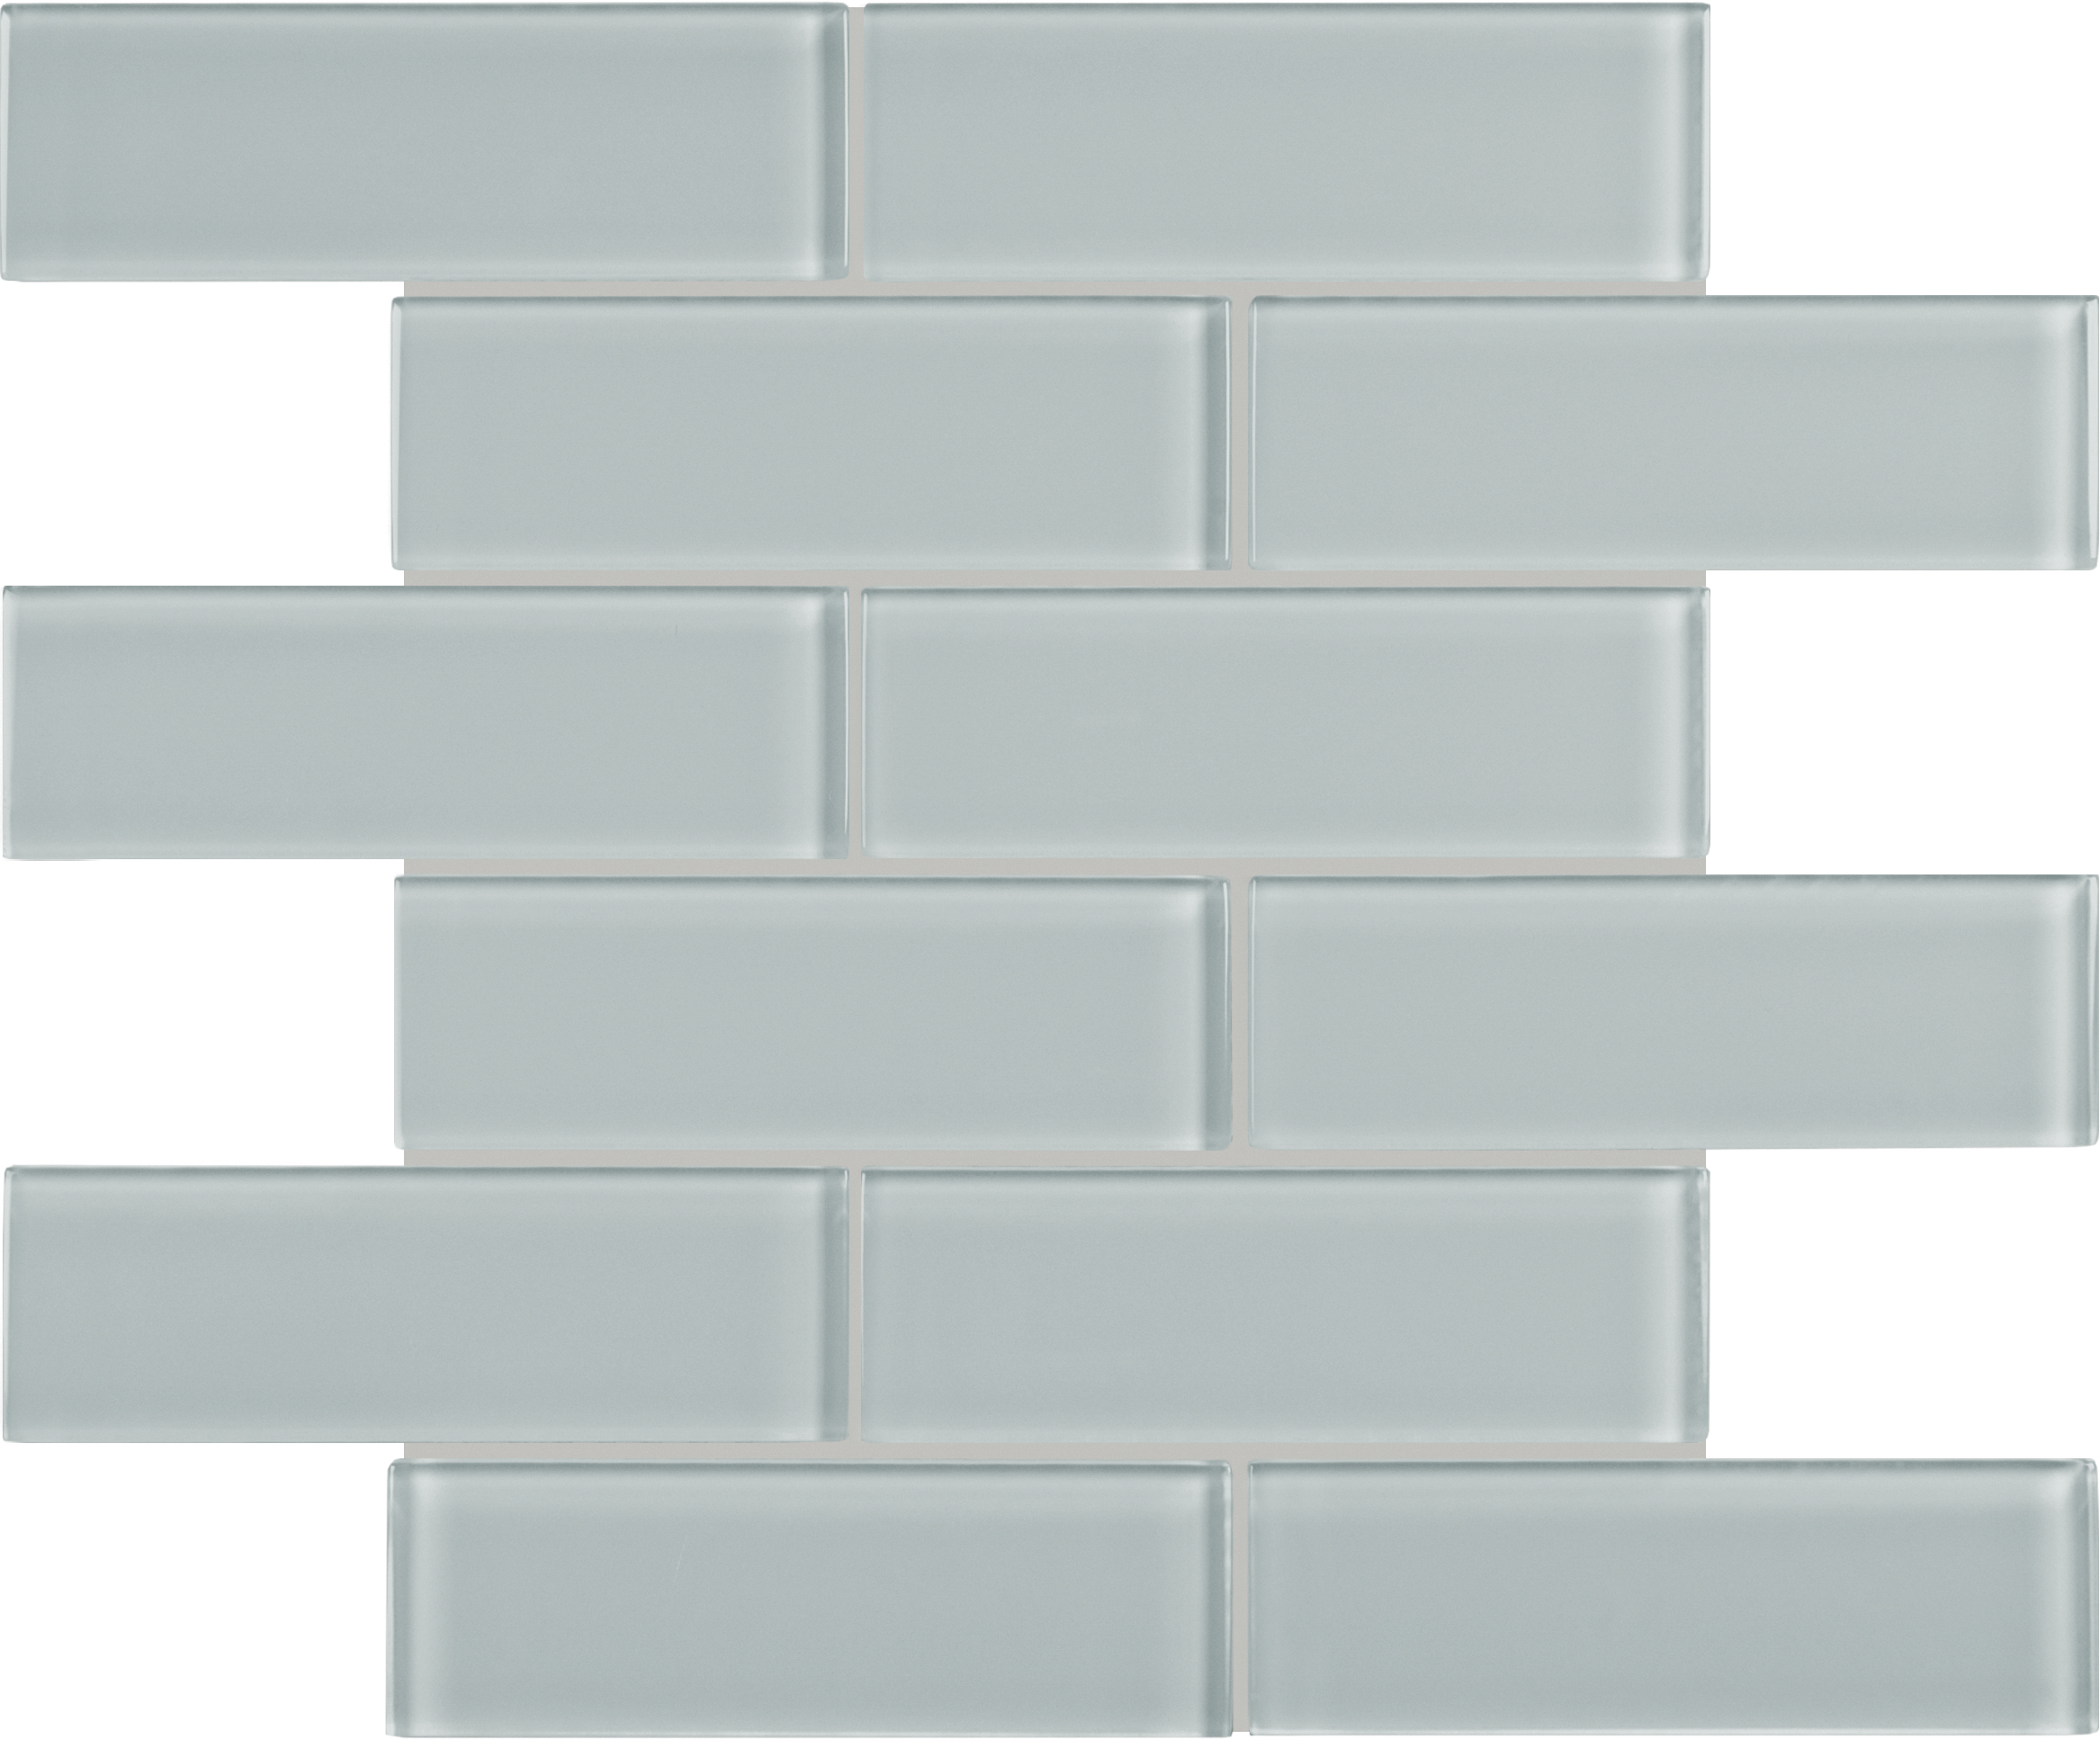 cloud brick offset 2x6-inch pattern fused glass mosaic from element anatolia collection distributed by surface group international glossy finish rounded edge mesh shape